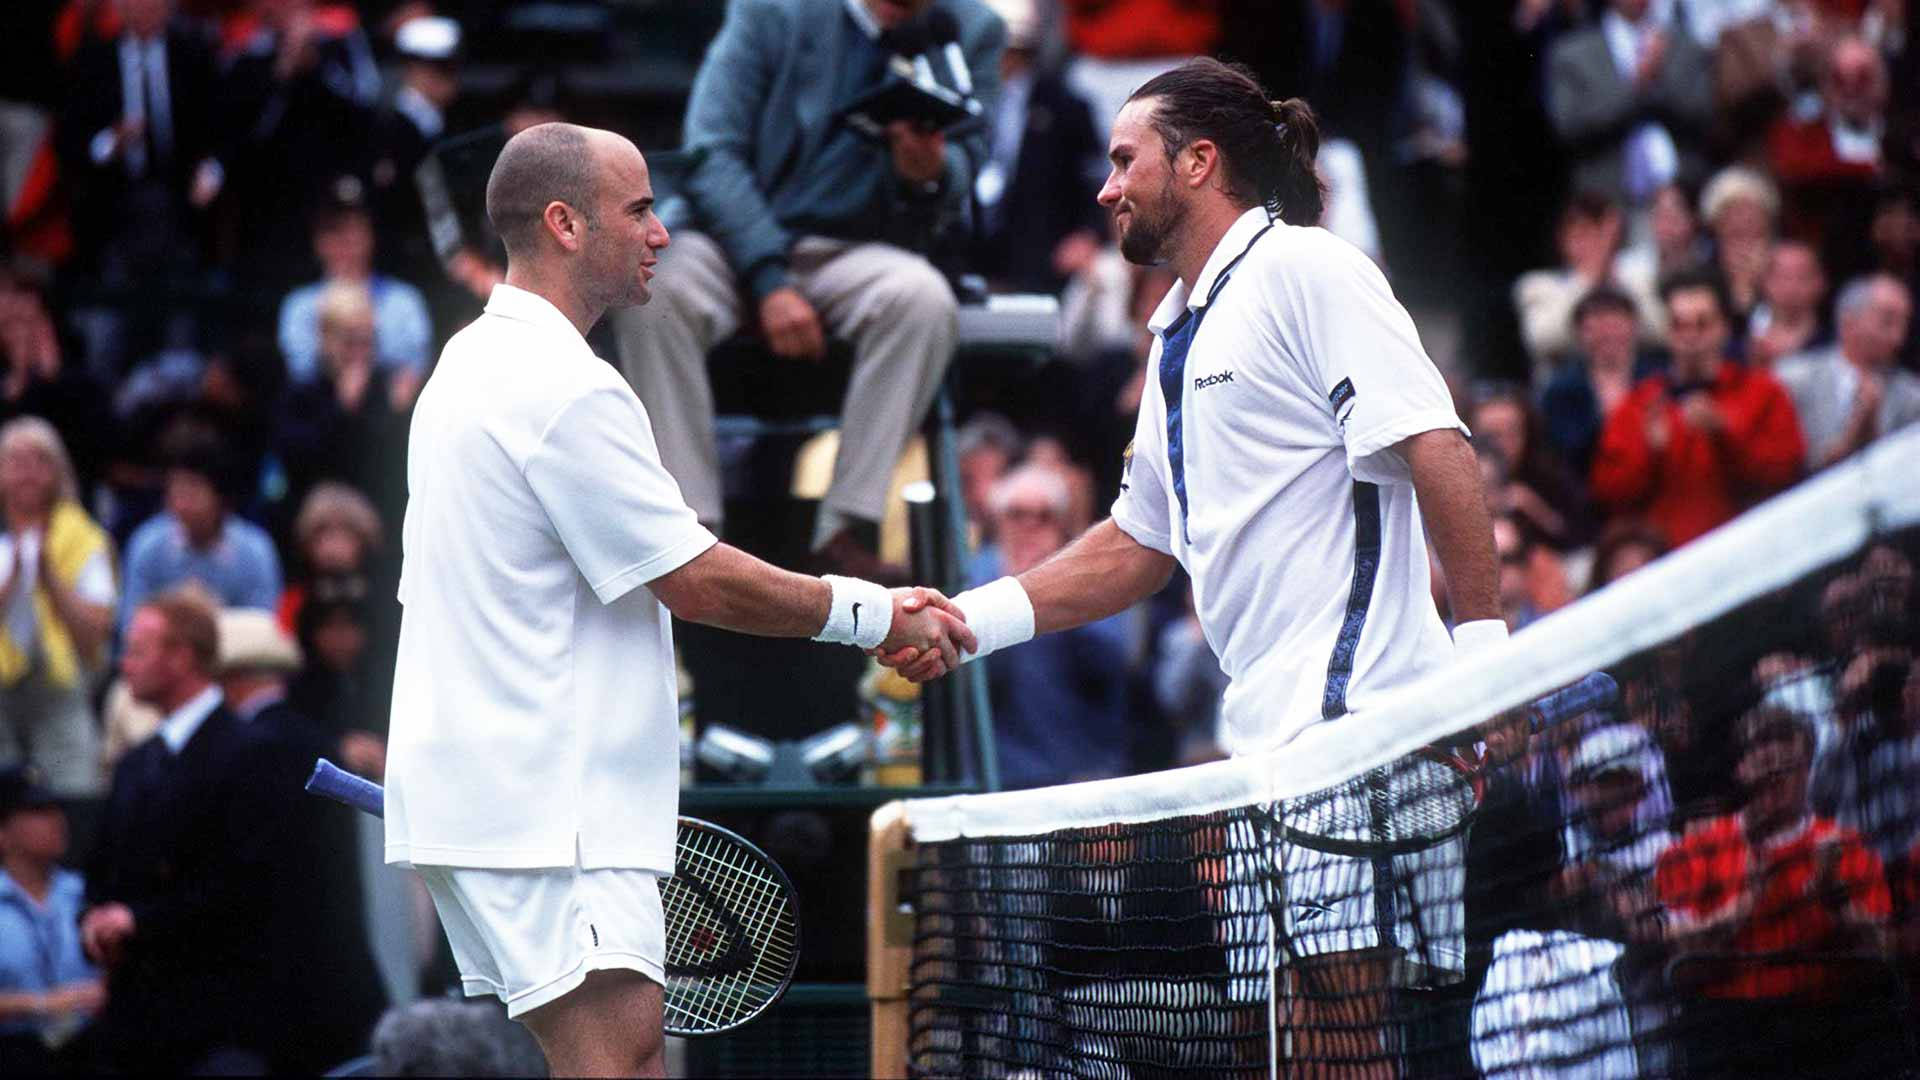 Patrickrafter Och Andre Agassi. (note: This Sentence Would Likely Be Used As The Title Of The Wallpaper Image In Swedish.) Wallpaper